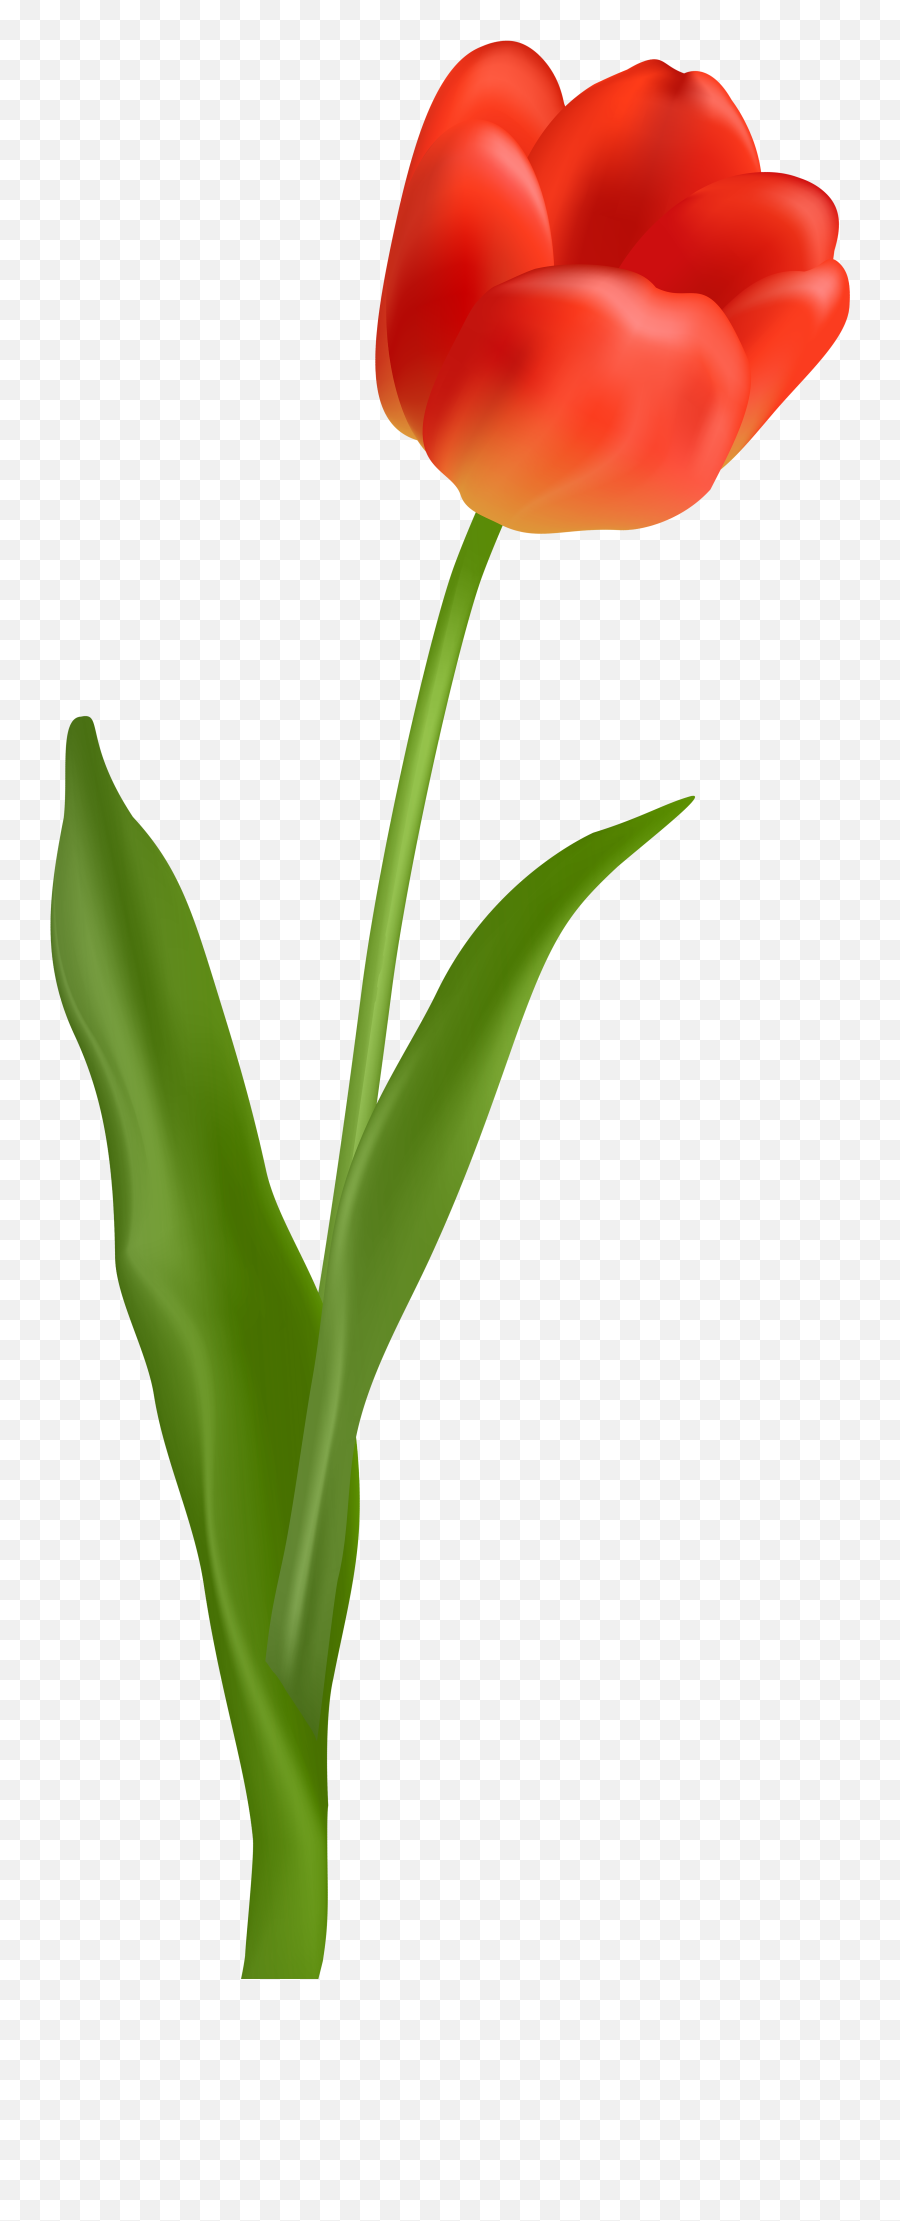 Library Of Flower Image Free Tulip Png Emoji,Tulips Clipart